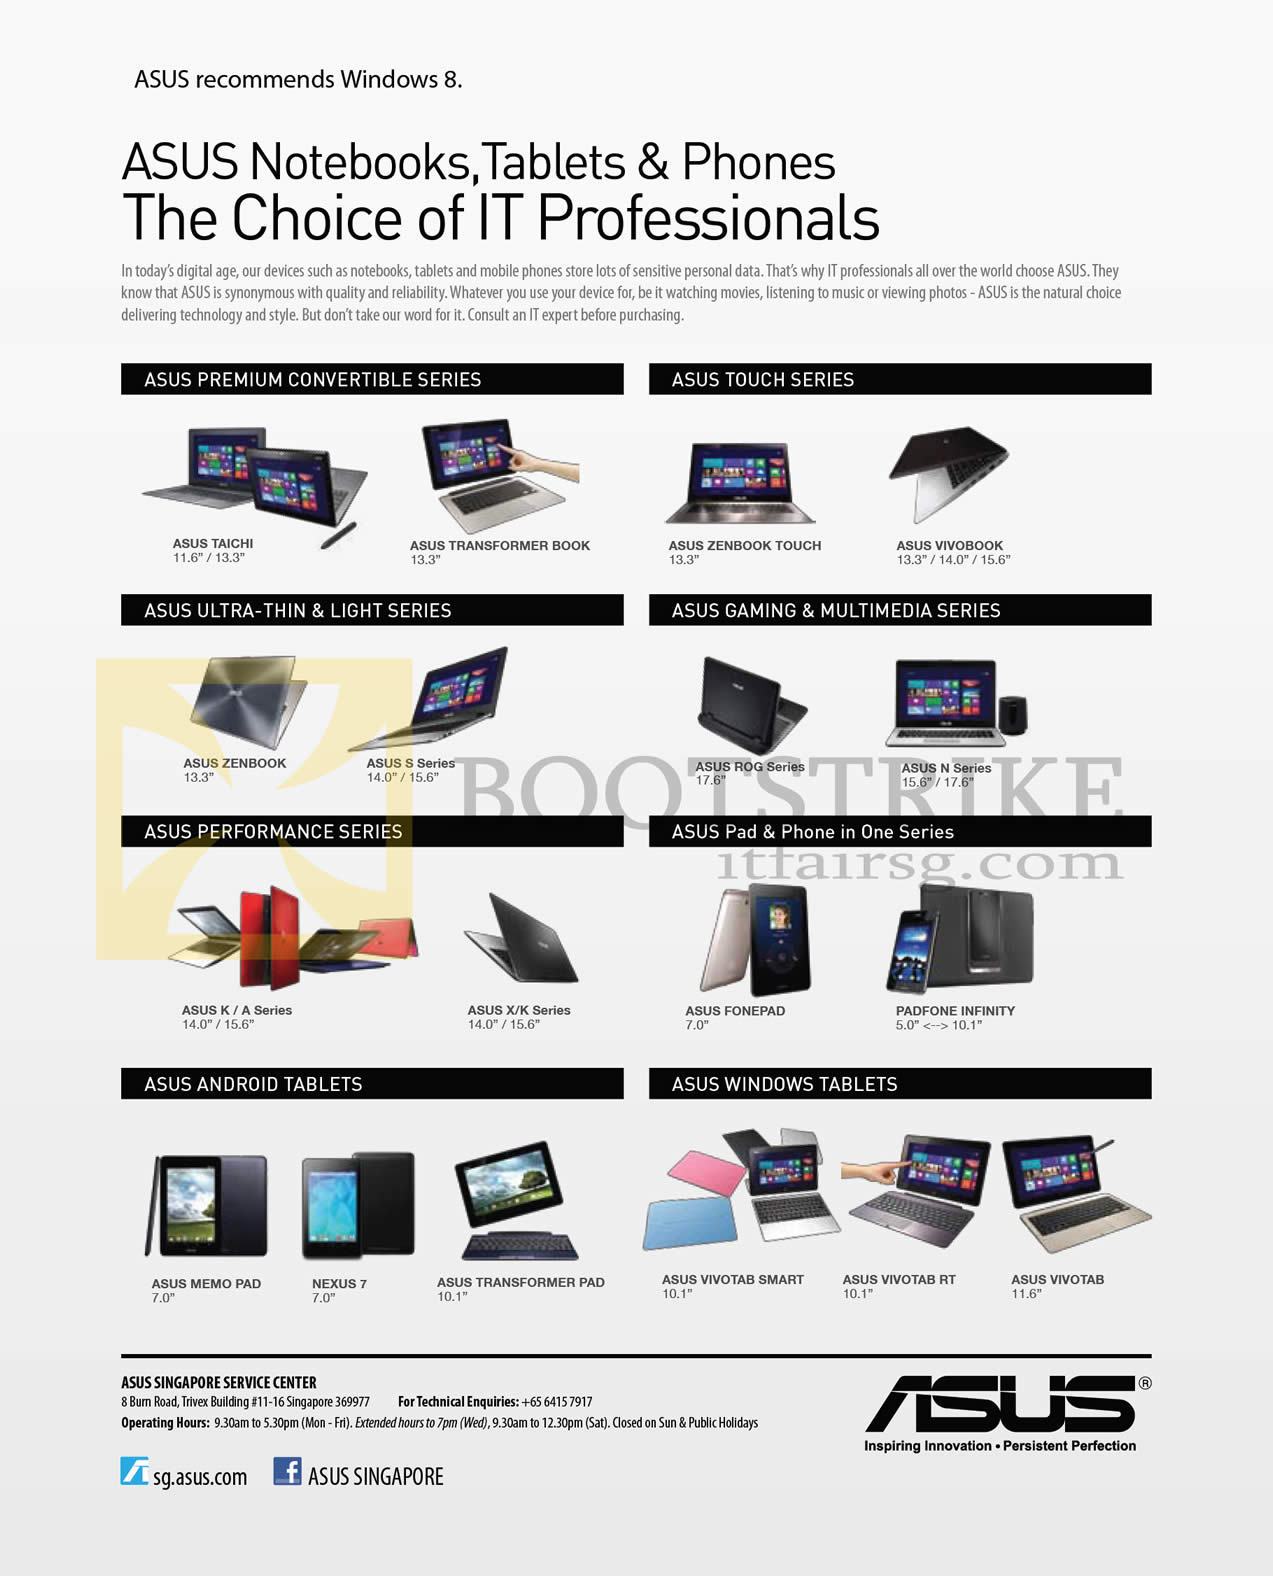 PC SHOW 2013 price list image brochure of ASUS Notebooks Product Range Convertible, Touch, Ultra Thin, Light, Gaming, Multimedia, Performance, Android, Tablets